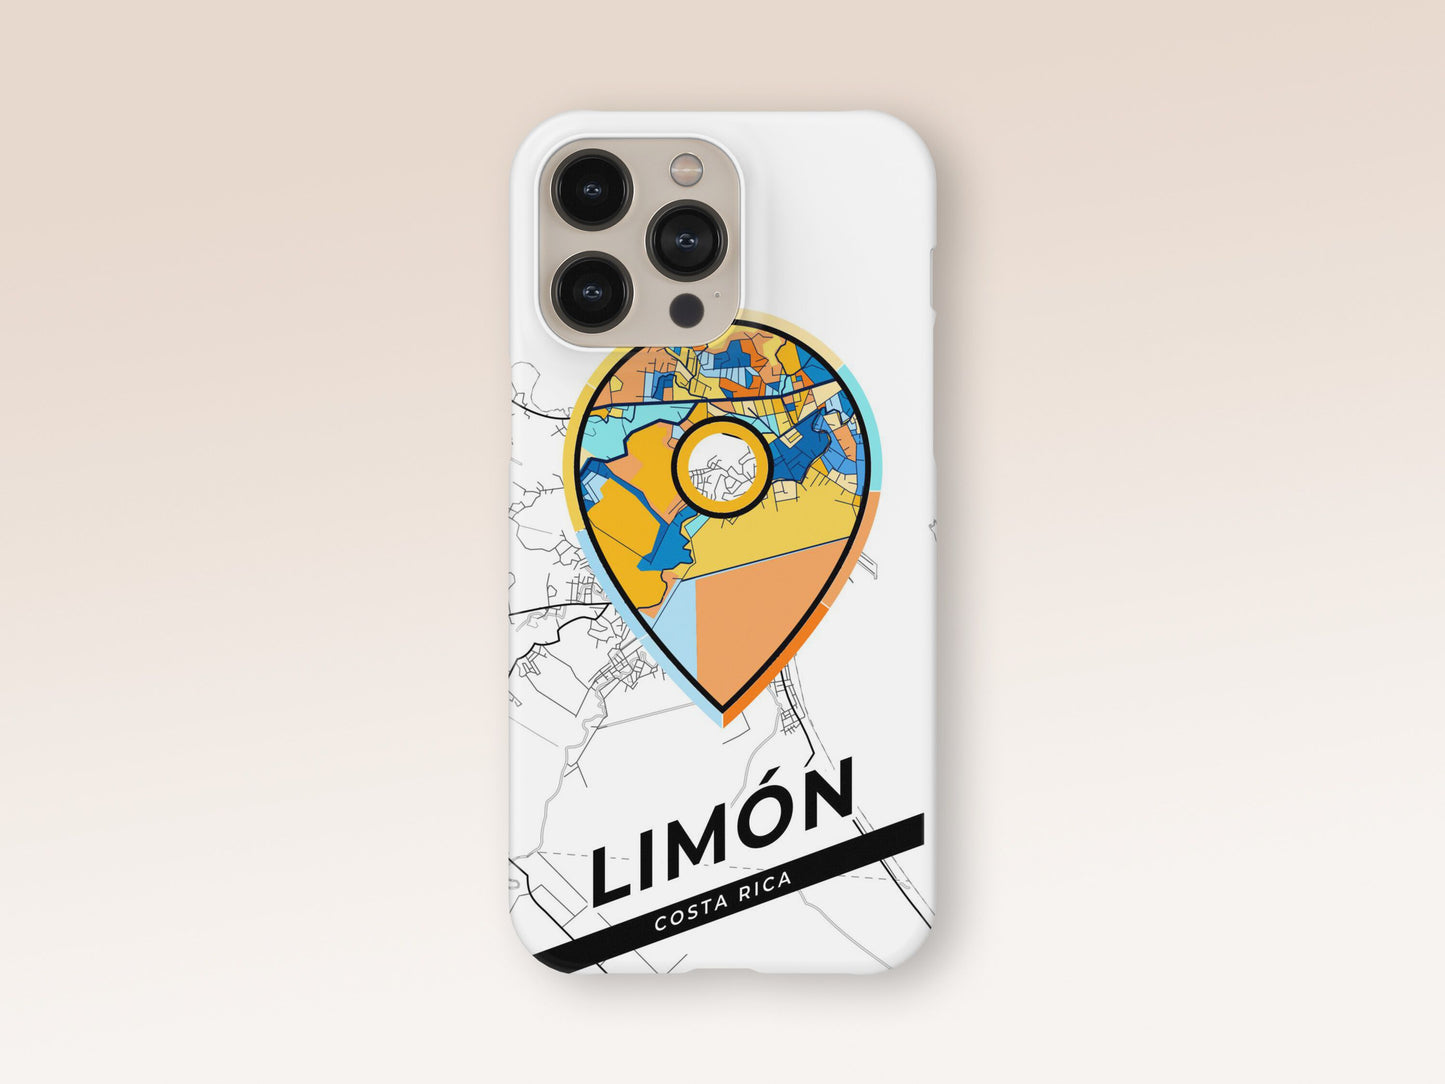 Limón Costa Rica slim phone case with colorful icon. Birthday, wedding or housewarming gift. Couple match cases. 1